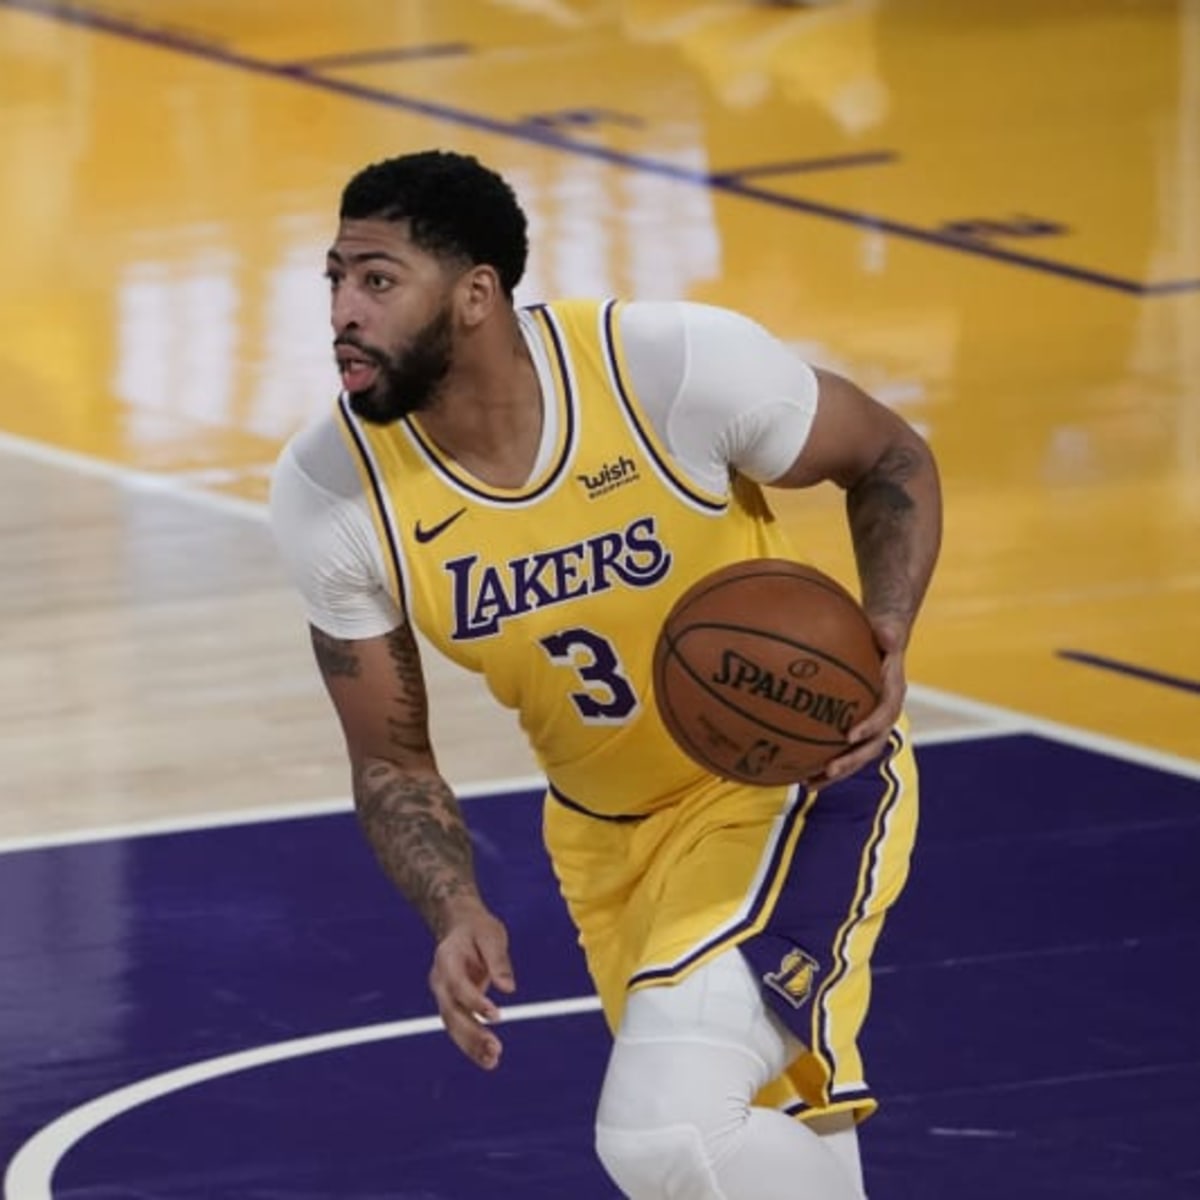 Does Anthony Davis 'suck' right now? The Lakers' star thinks so